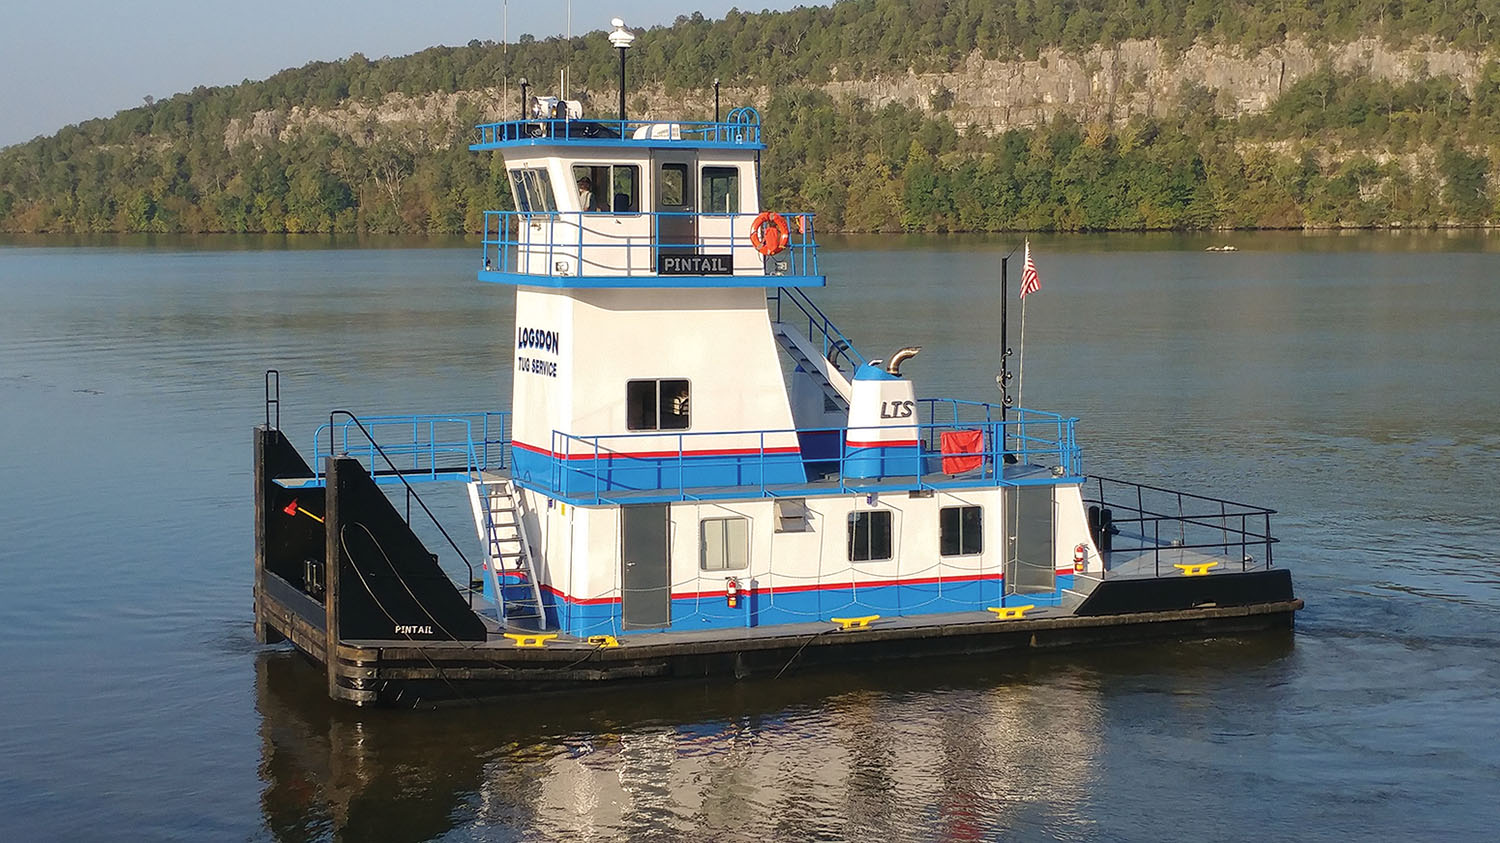 The mv. Pintail, one of Serodino Inc.’s Super Tiger Class of workboats, has been certified to be compliant with Subchapter M design standards.